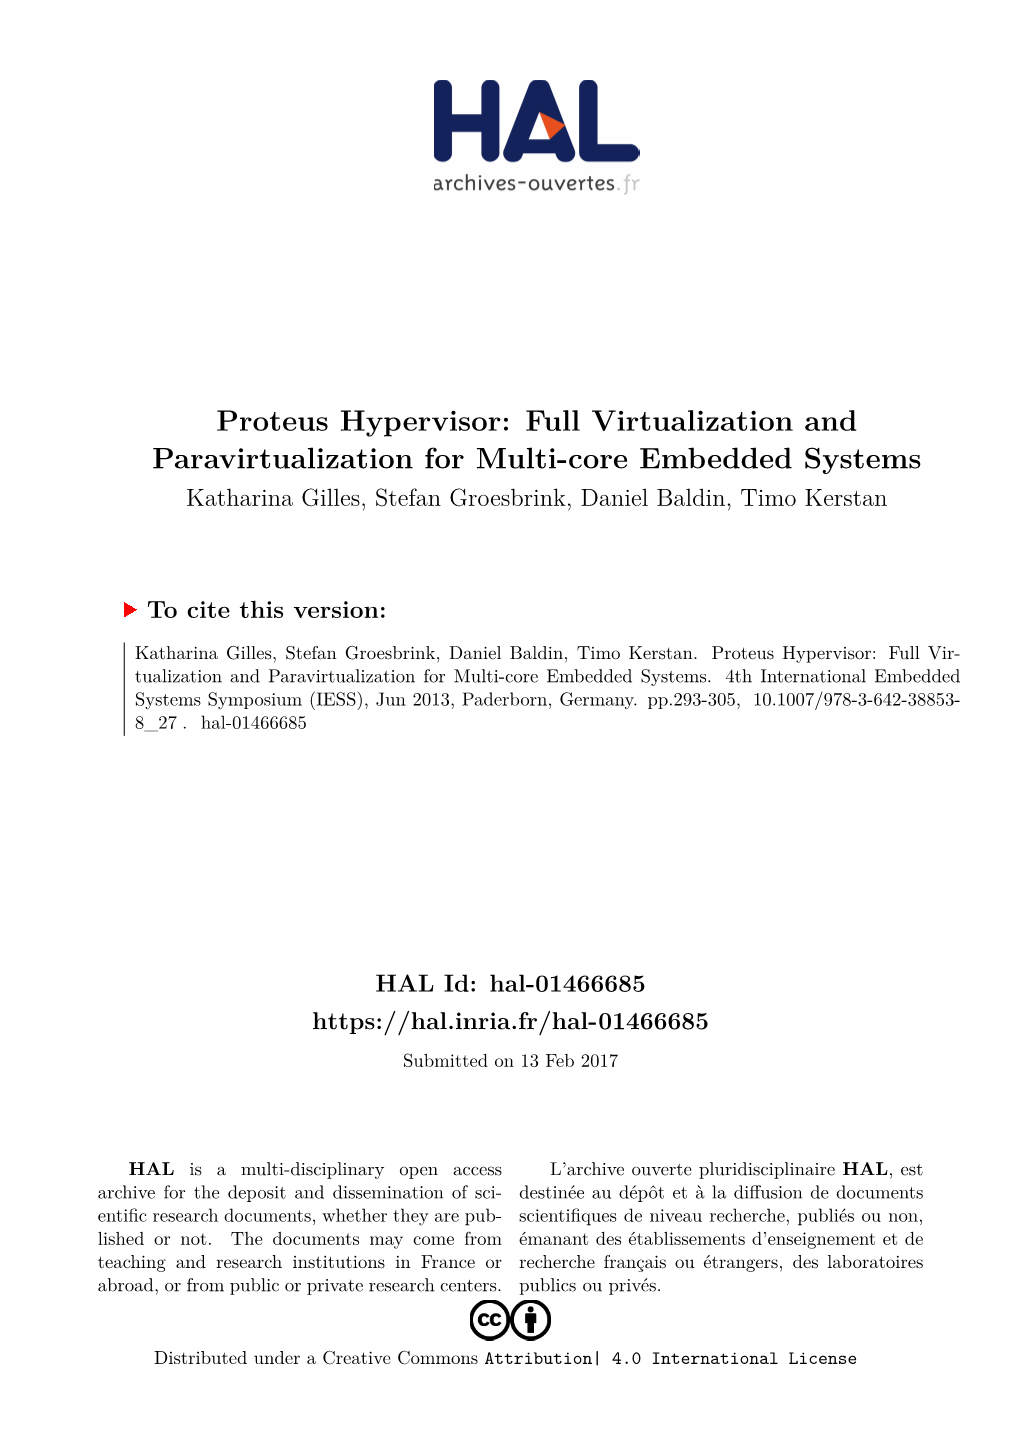 Proteus Hypervisor: Full Virtualization and Paravirtualization for Multi-Core Embedded Systems Katharina Gilles, Stefan Groesbrink, Daniel Baldin, Timo Kerstan